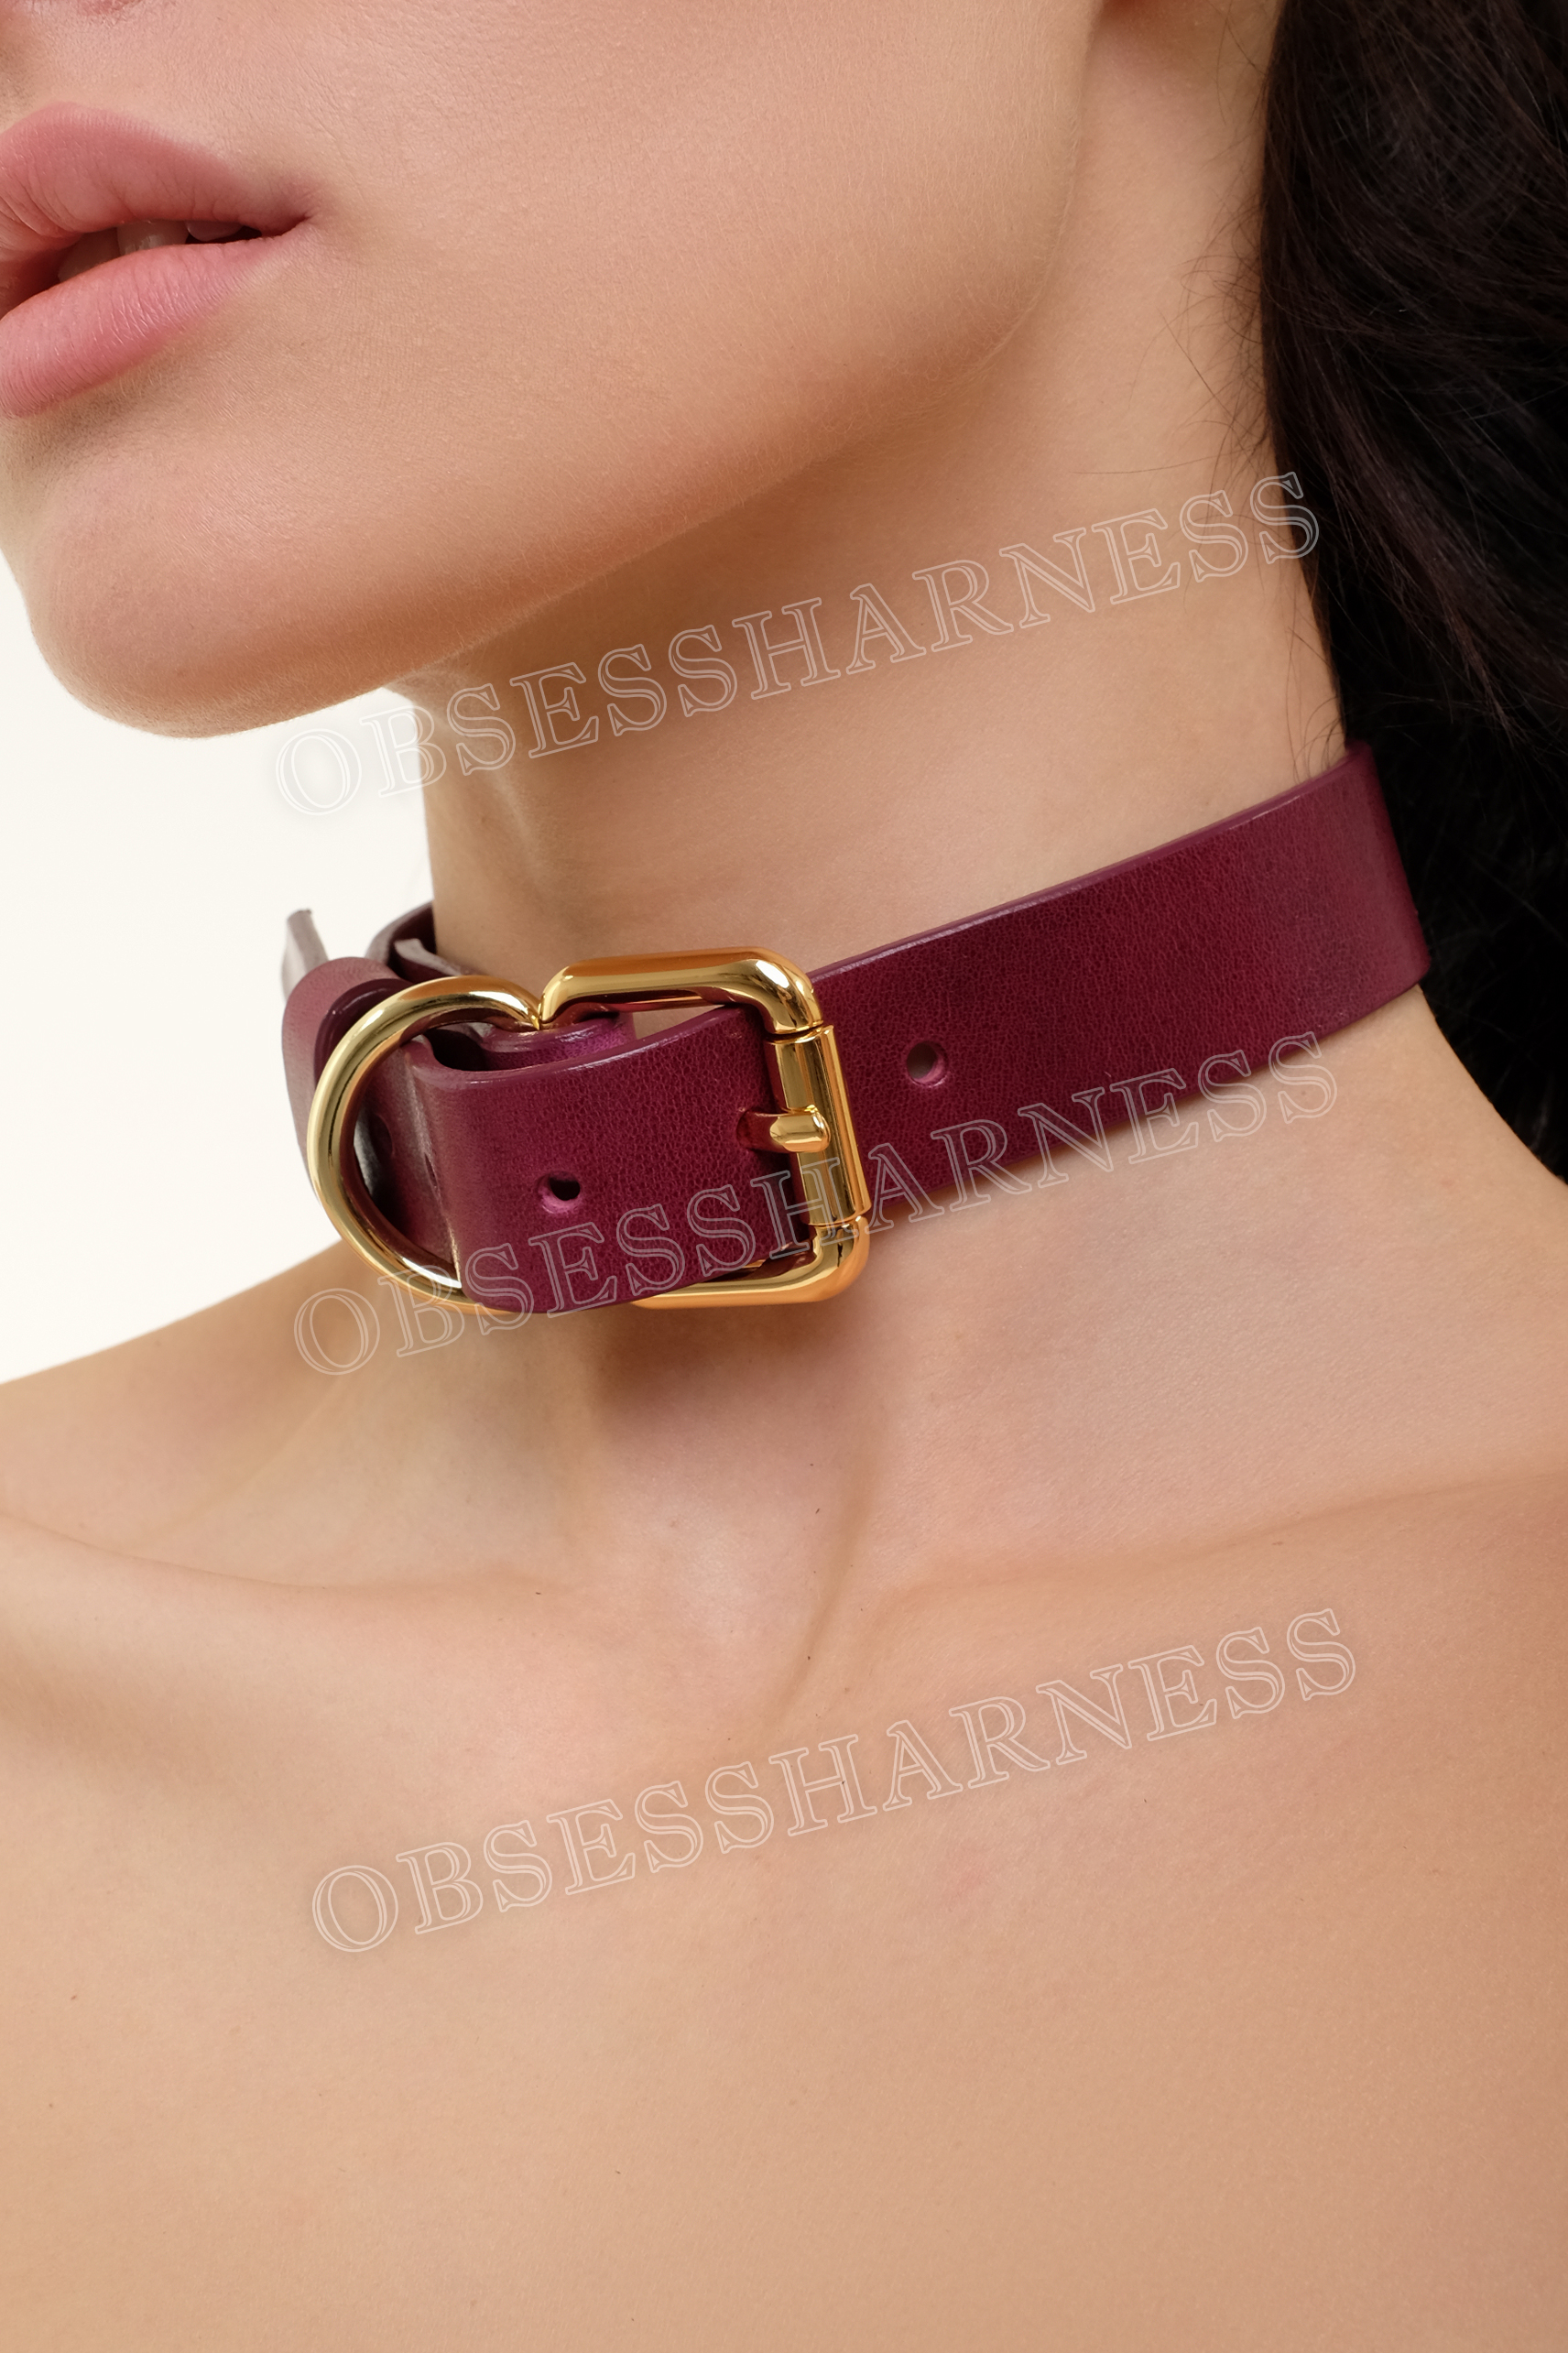 Leather choker sexy purple with a large buckle in the center and a ring for a leash  - Obsessharness